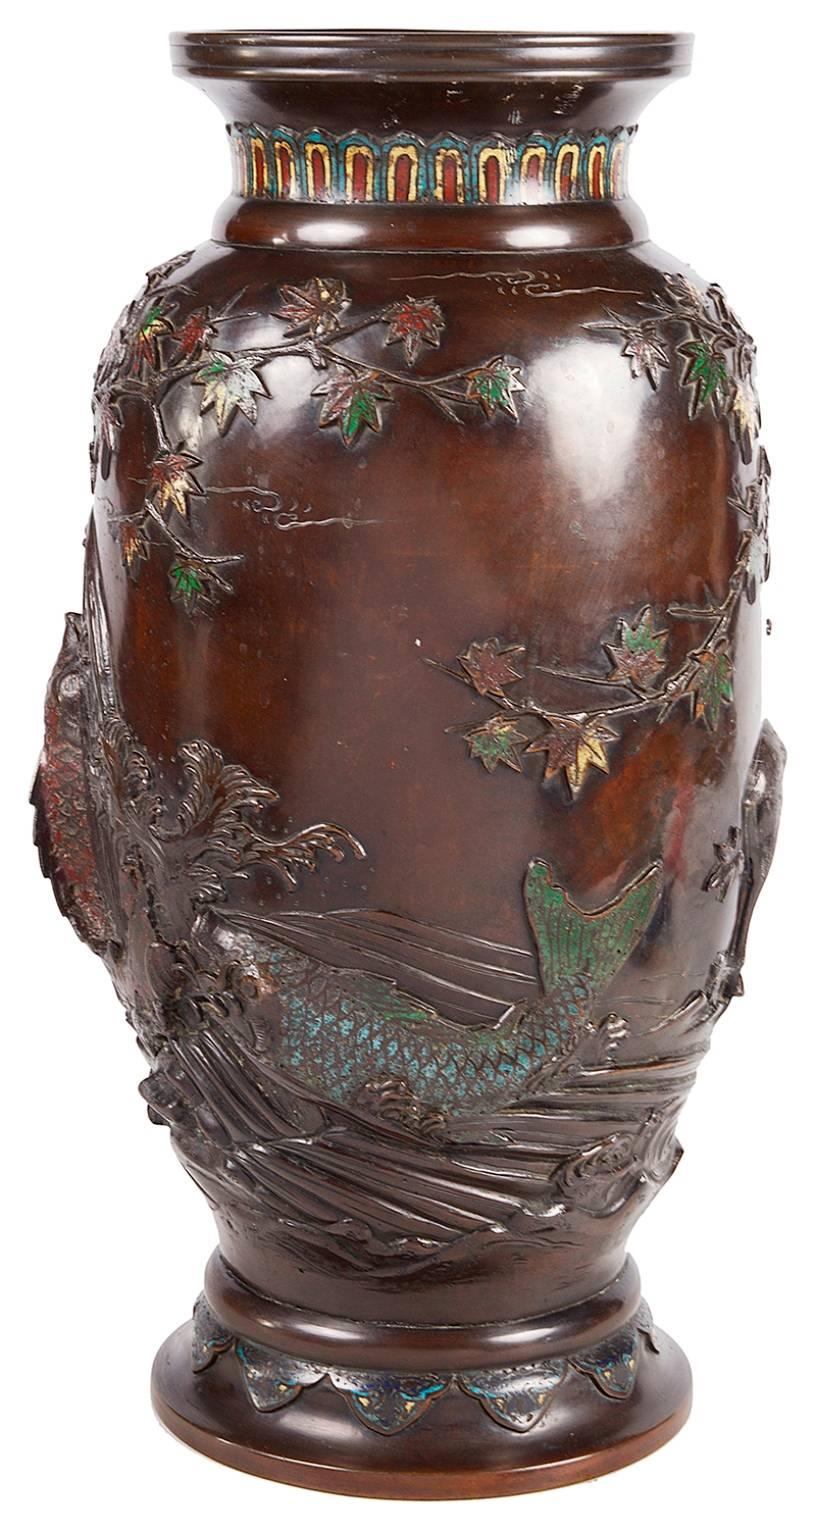 A very impressive Japanese bronze and cloisonne enamel vase having raised decoration depicting a carp in the river, with a deer under a tree.